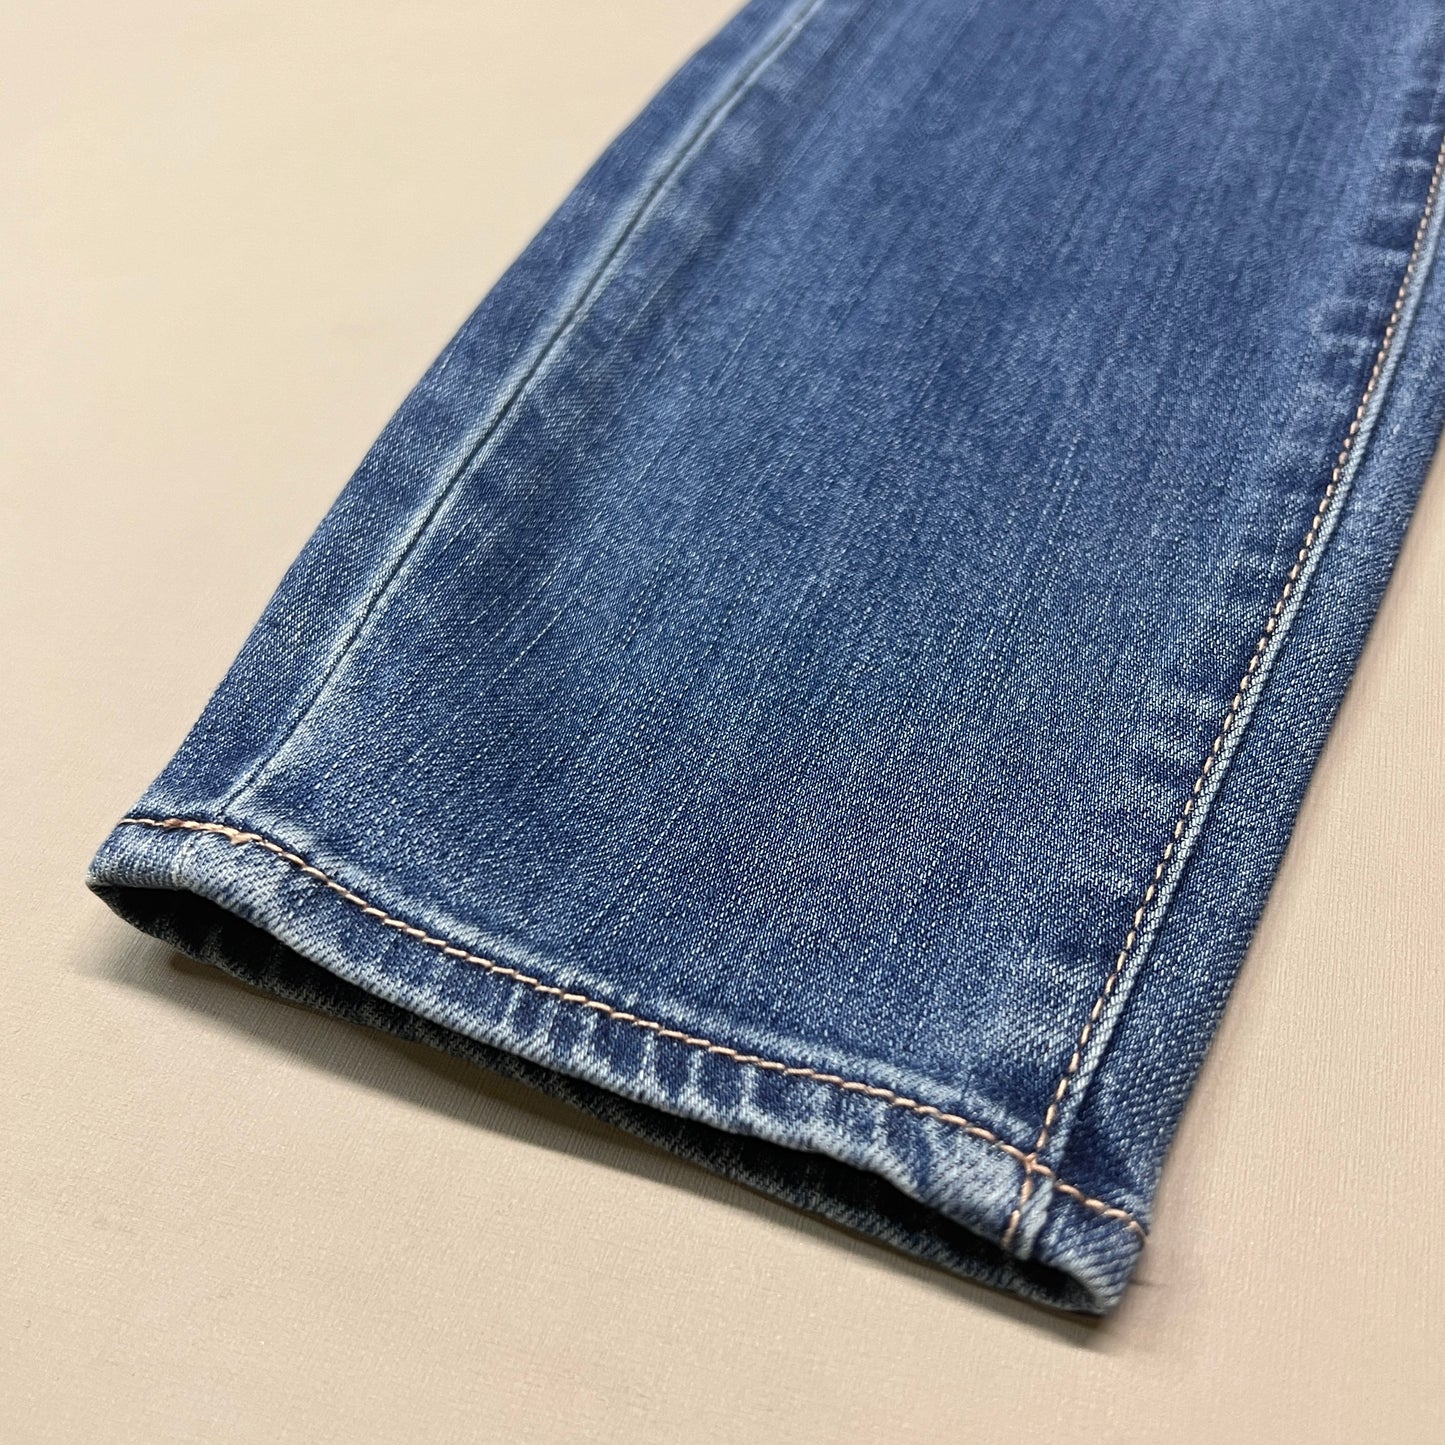 ARTICLES OF SOCIETY Pearl City Denim Jeans Women's Sz 26 Blue 4018PLV-712 (New)